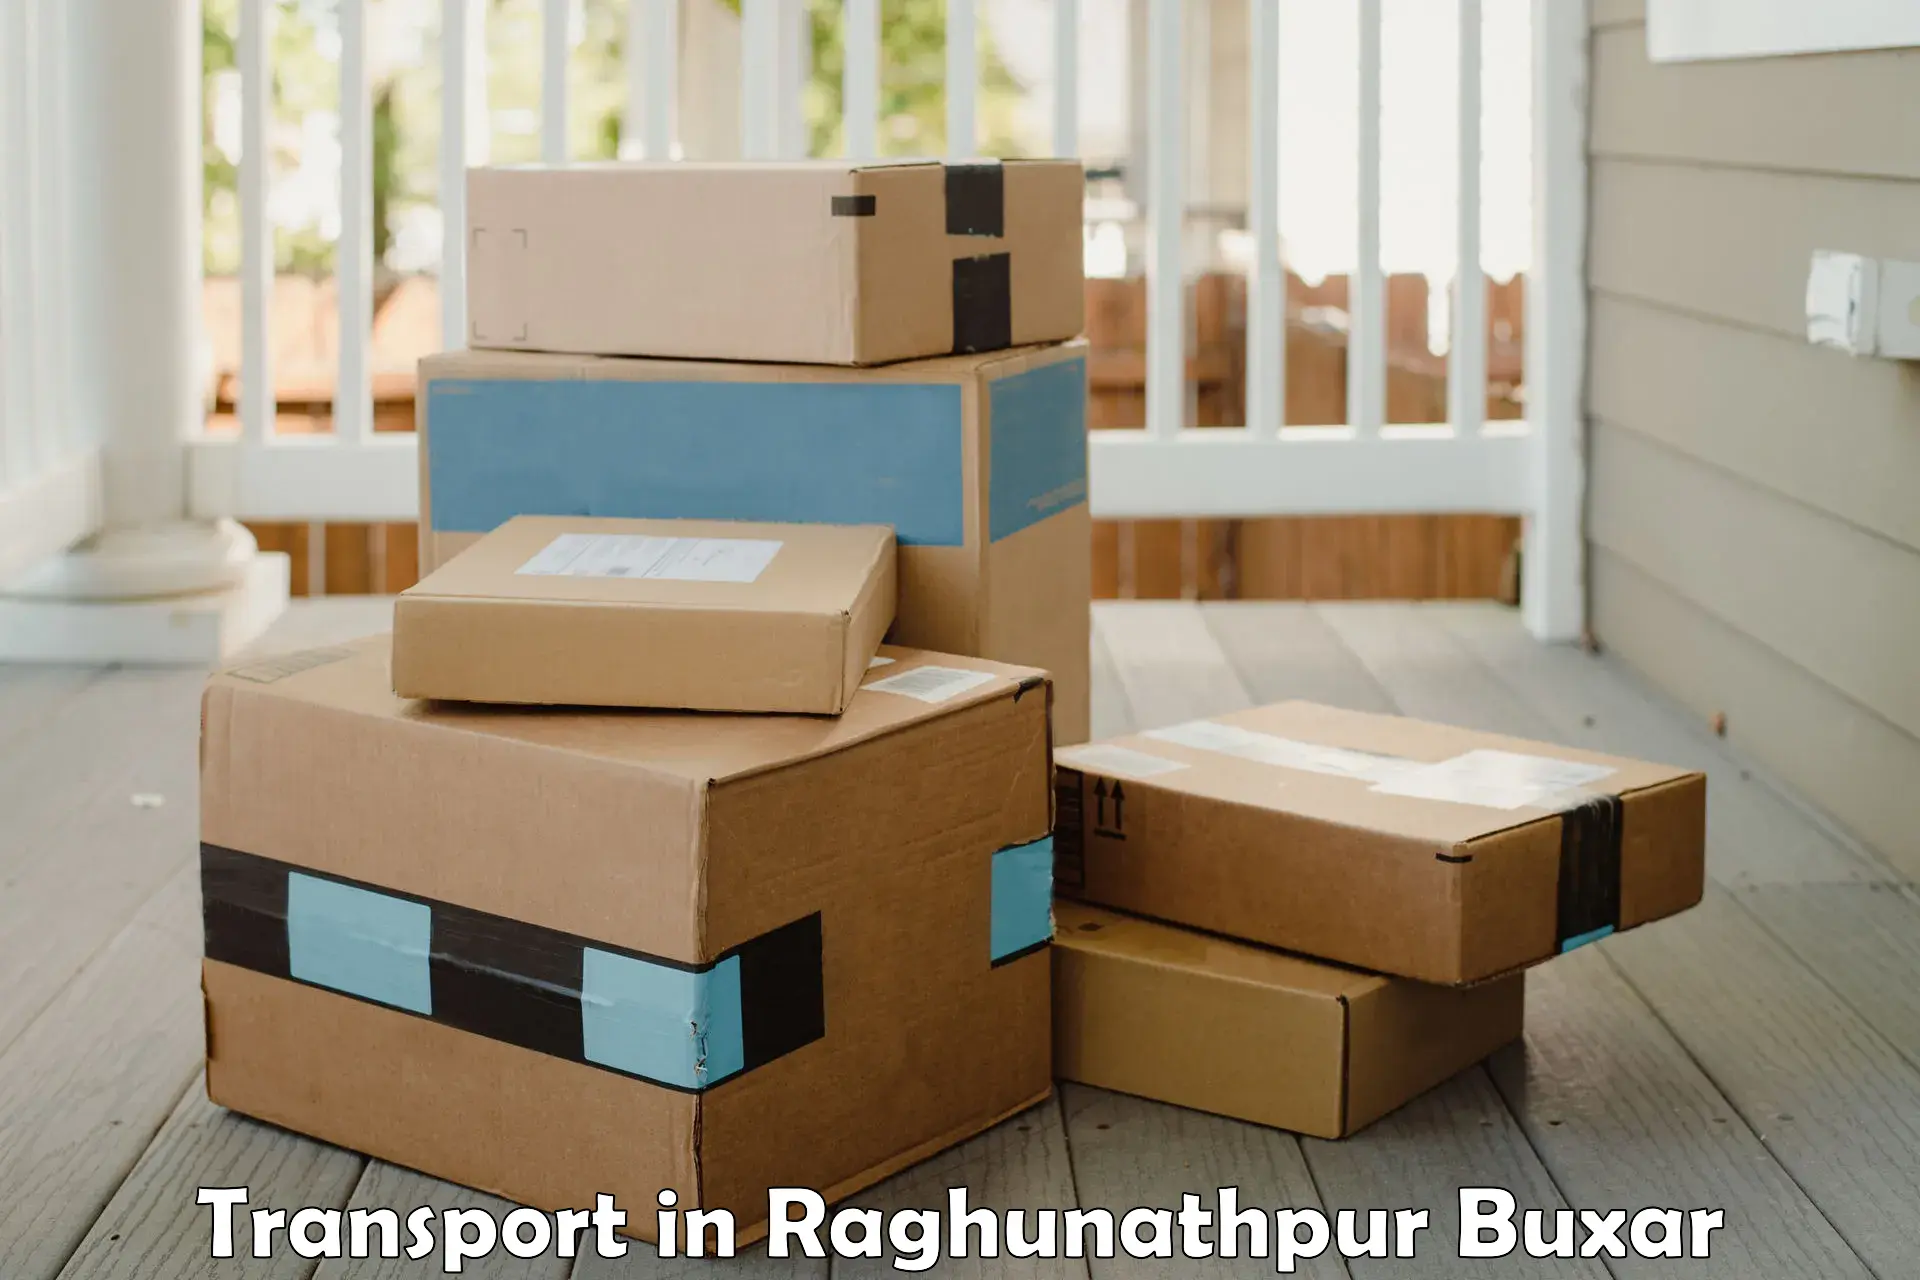 Goods delivery service in Raghunathpur Buxar